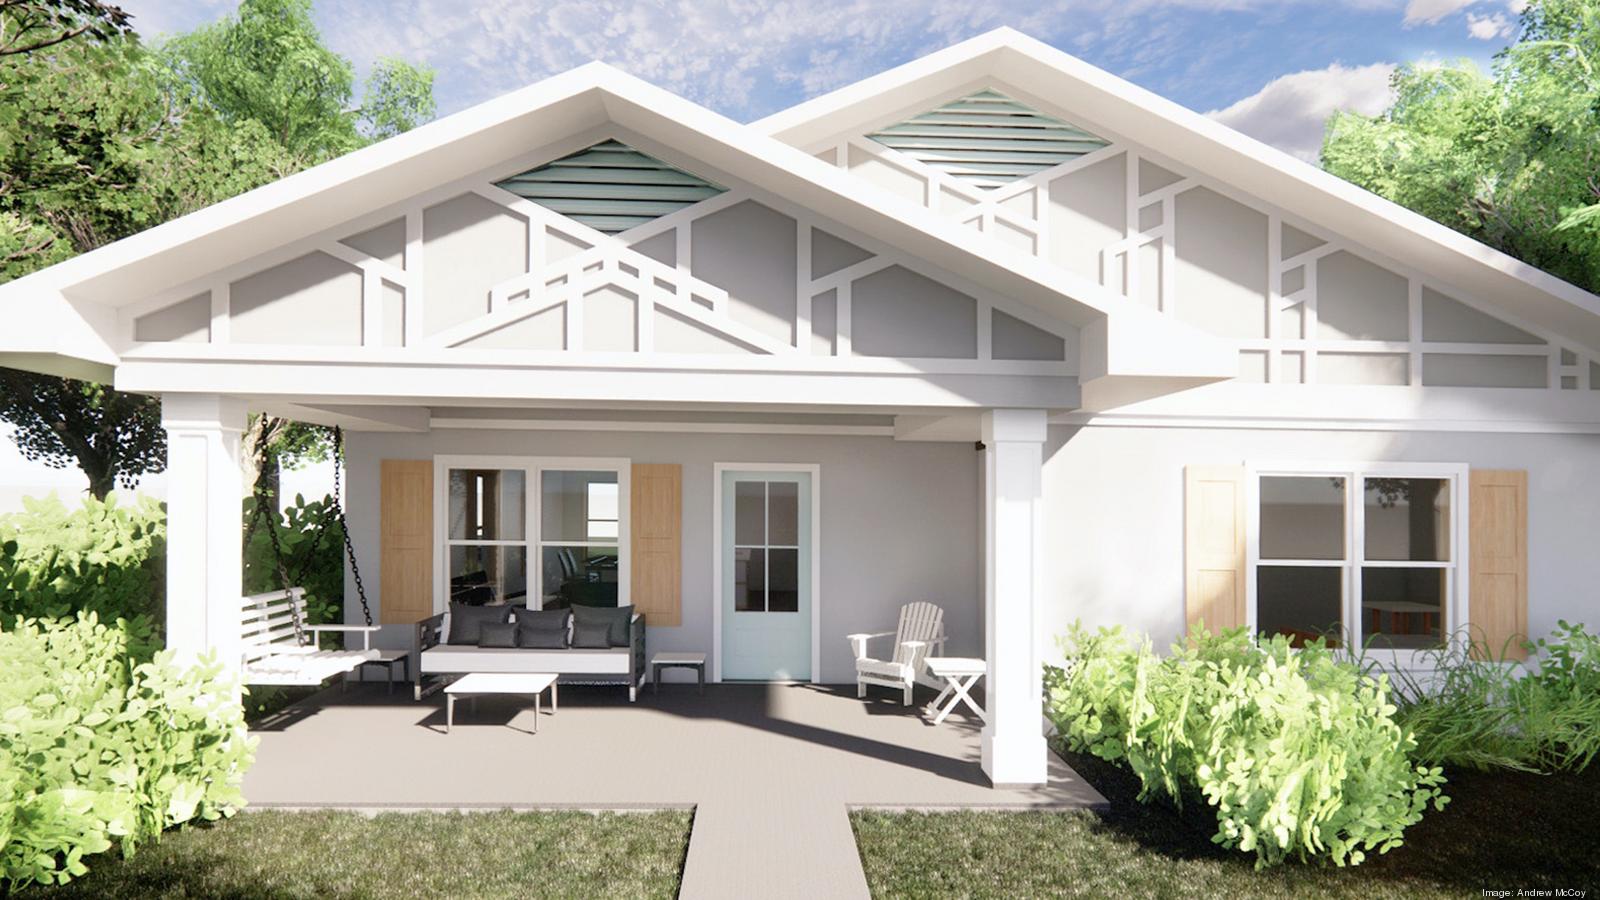 Richmond Inno - Virginia's first 3D printed house opens door to ...